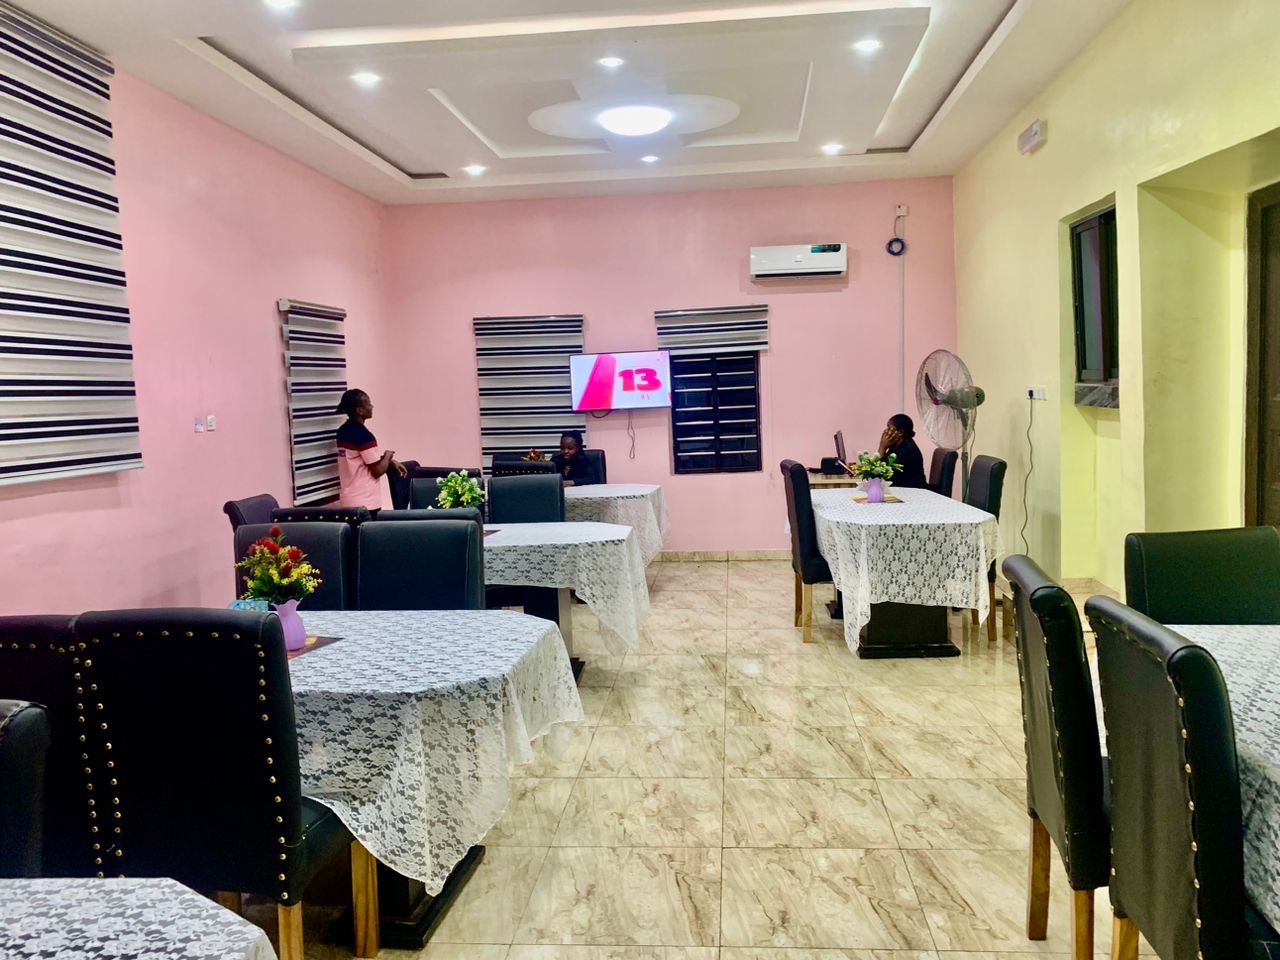 JIKSON ODO HOTEL AND SUITES, NSUKKA